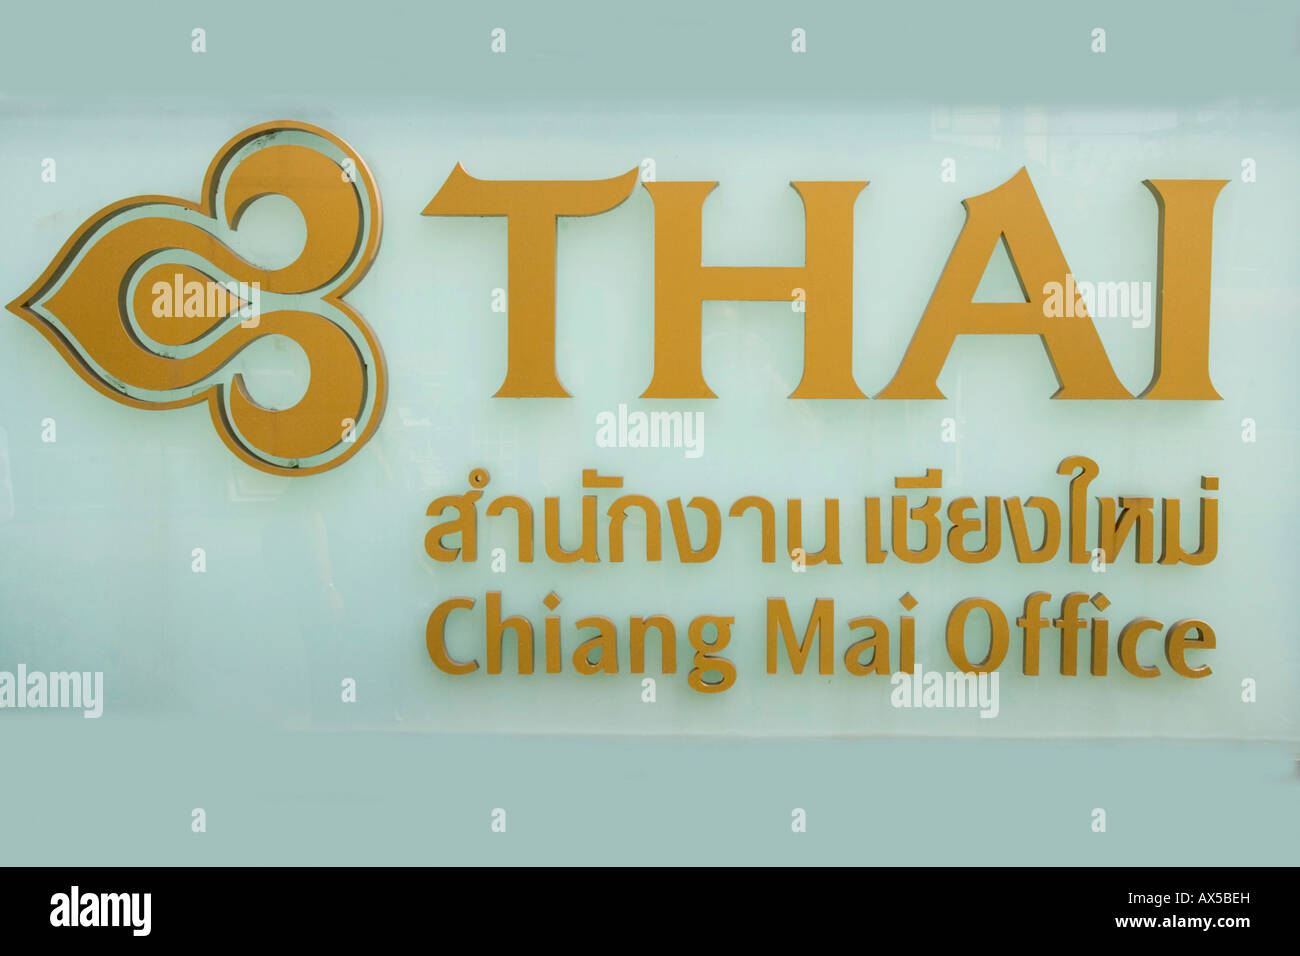 Thai Airways logo at the airline's office in Chiang Mai, Thailand, Southeast Asia Stock Photo